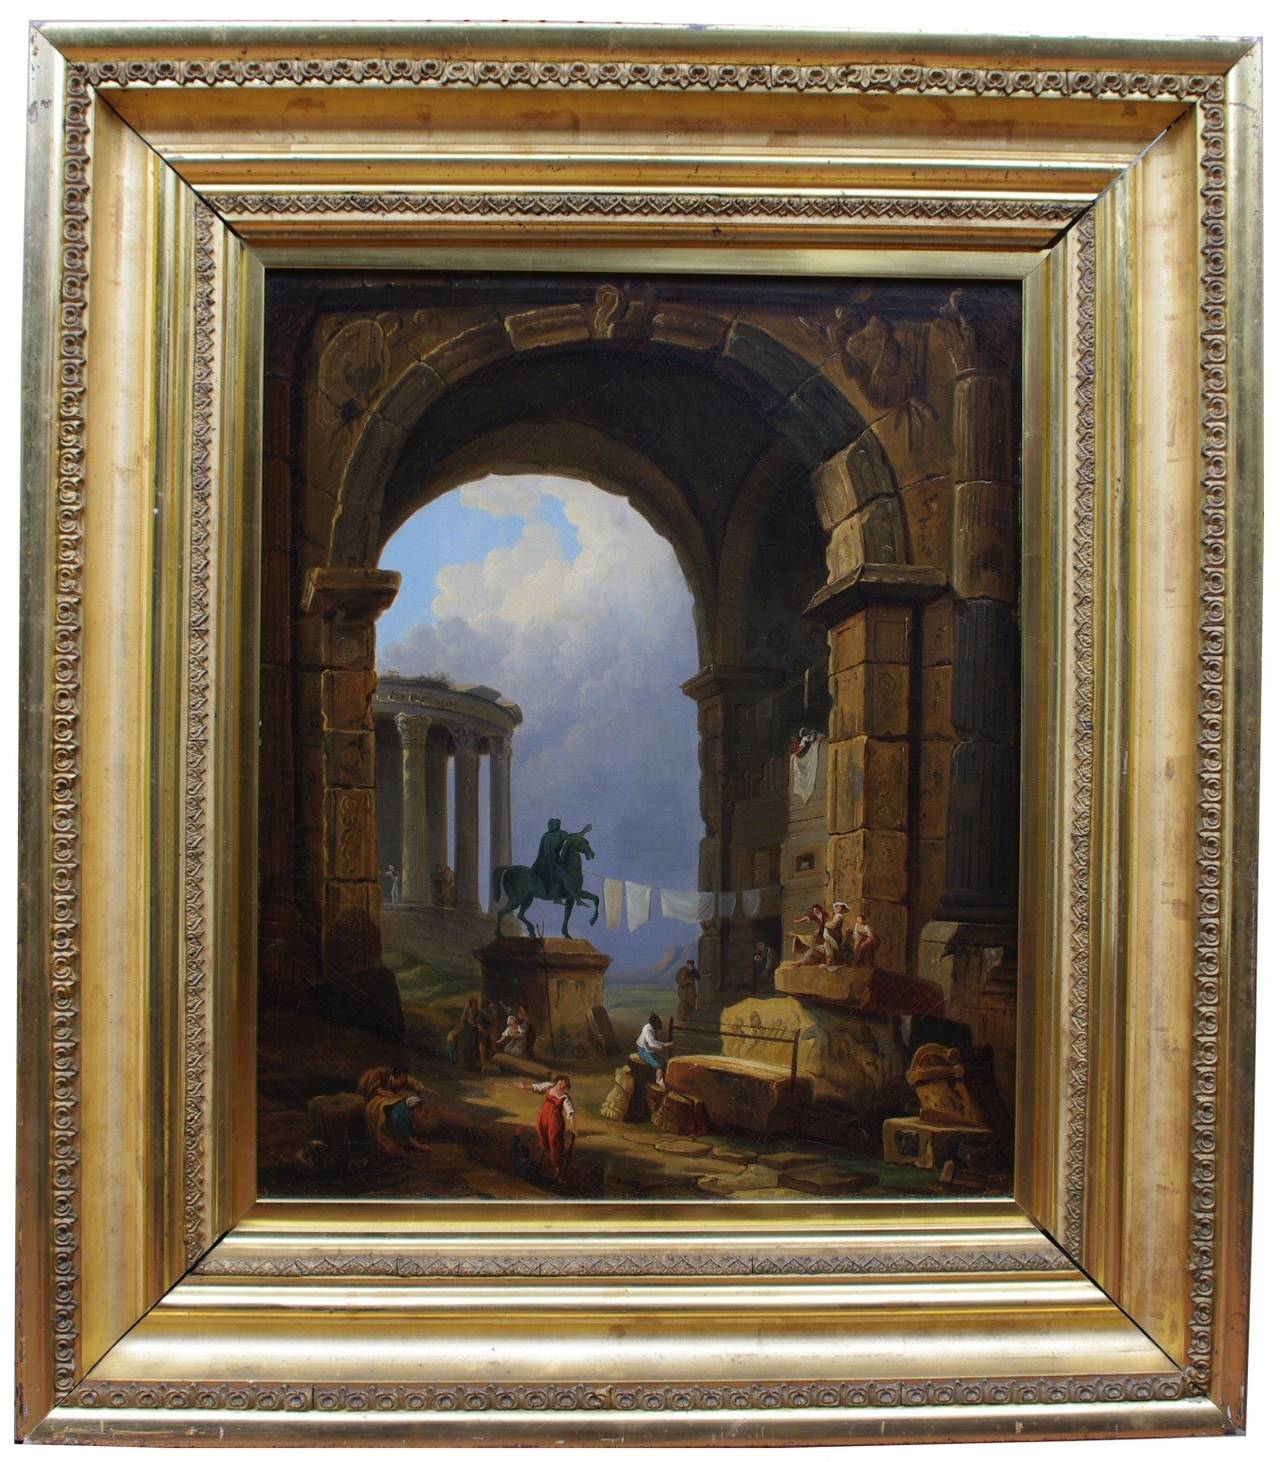 Roman Capriccio set within the Arch of Constantine, the statue of Marcus Aurelius in the middle ground and a temple ruin beyond.

This intriguing painting depicts a lively, nearly surrealistic scene taking place within the ancient ruins of Rome. A